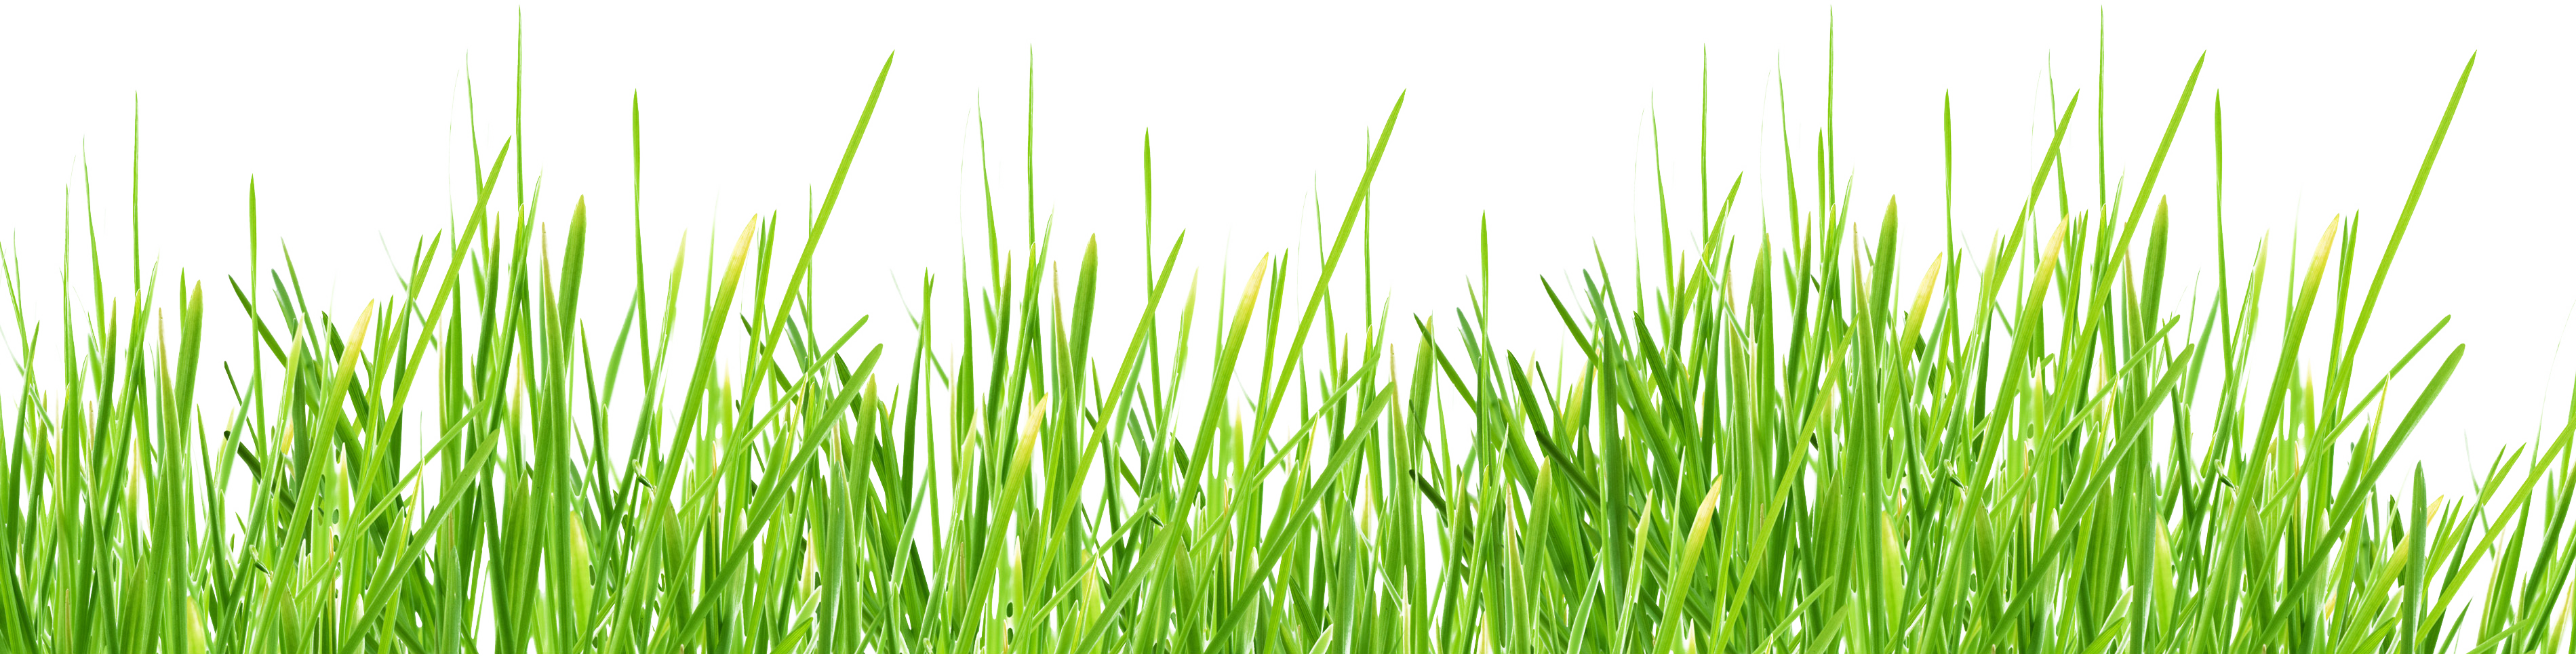 Grass PNG images, pictures.